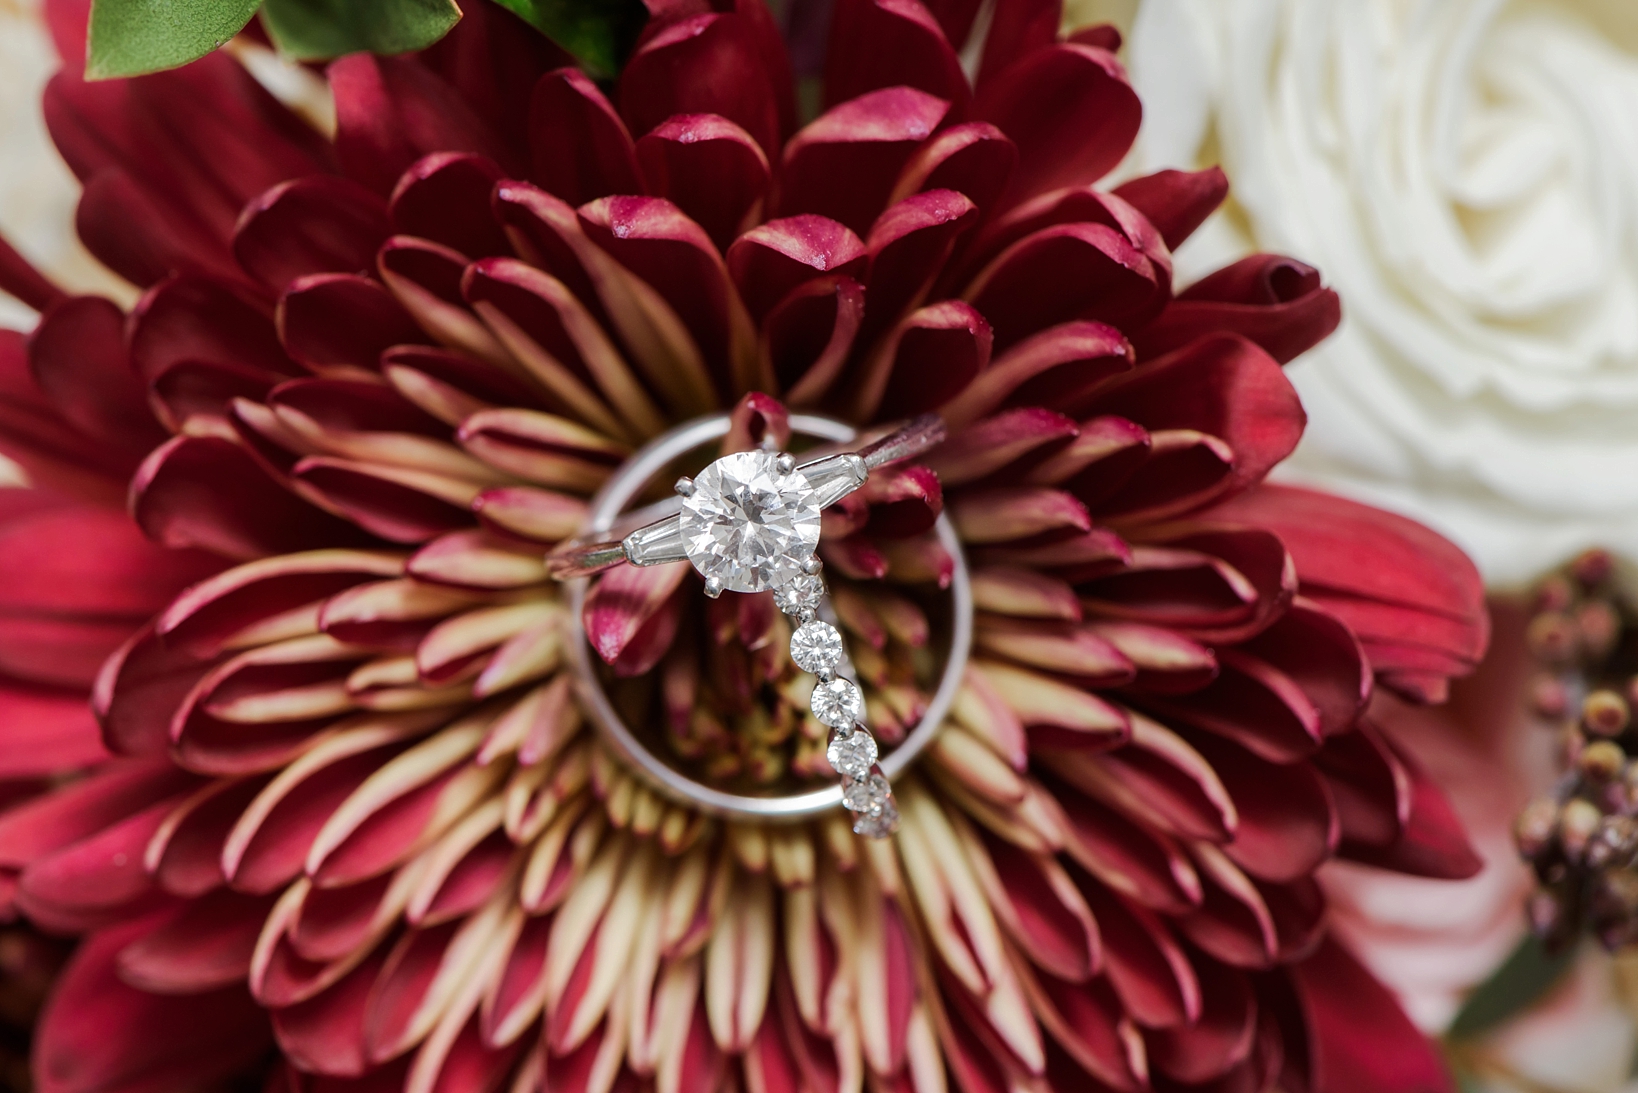 The wedding rings against the florals of the bride's bouquet